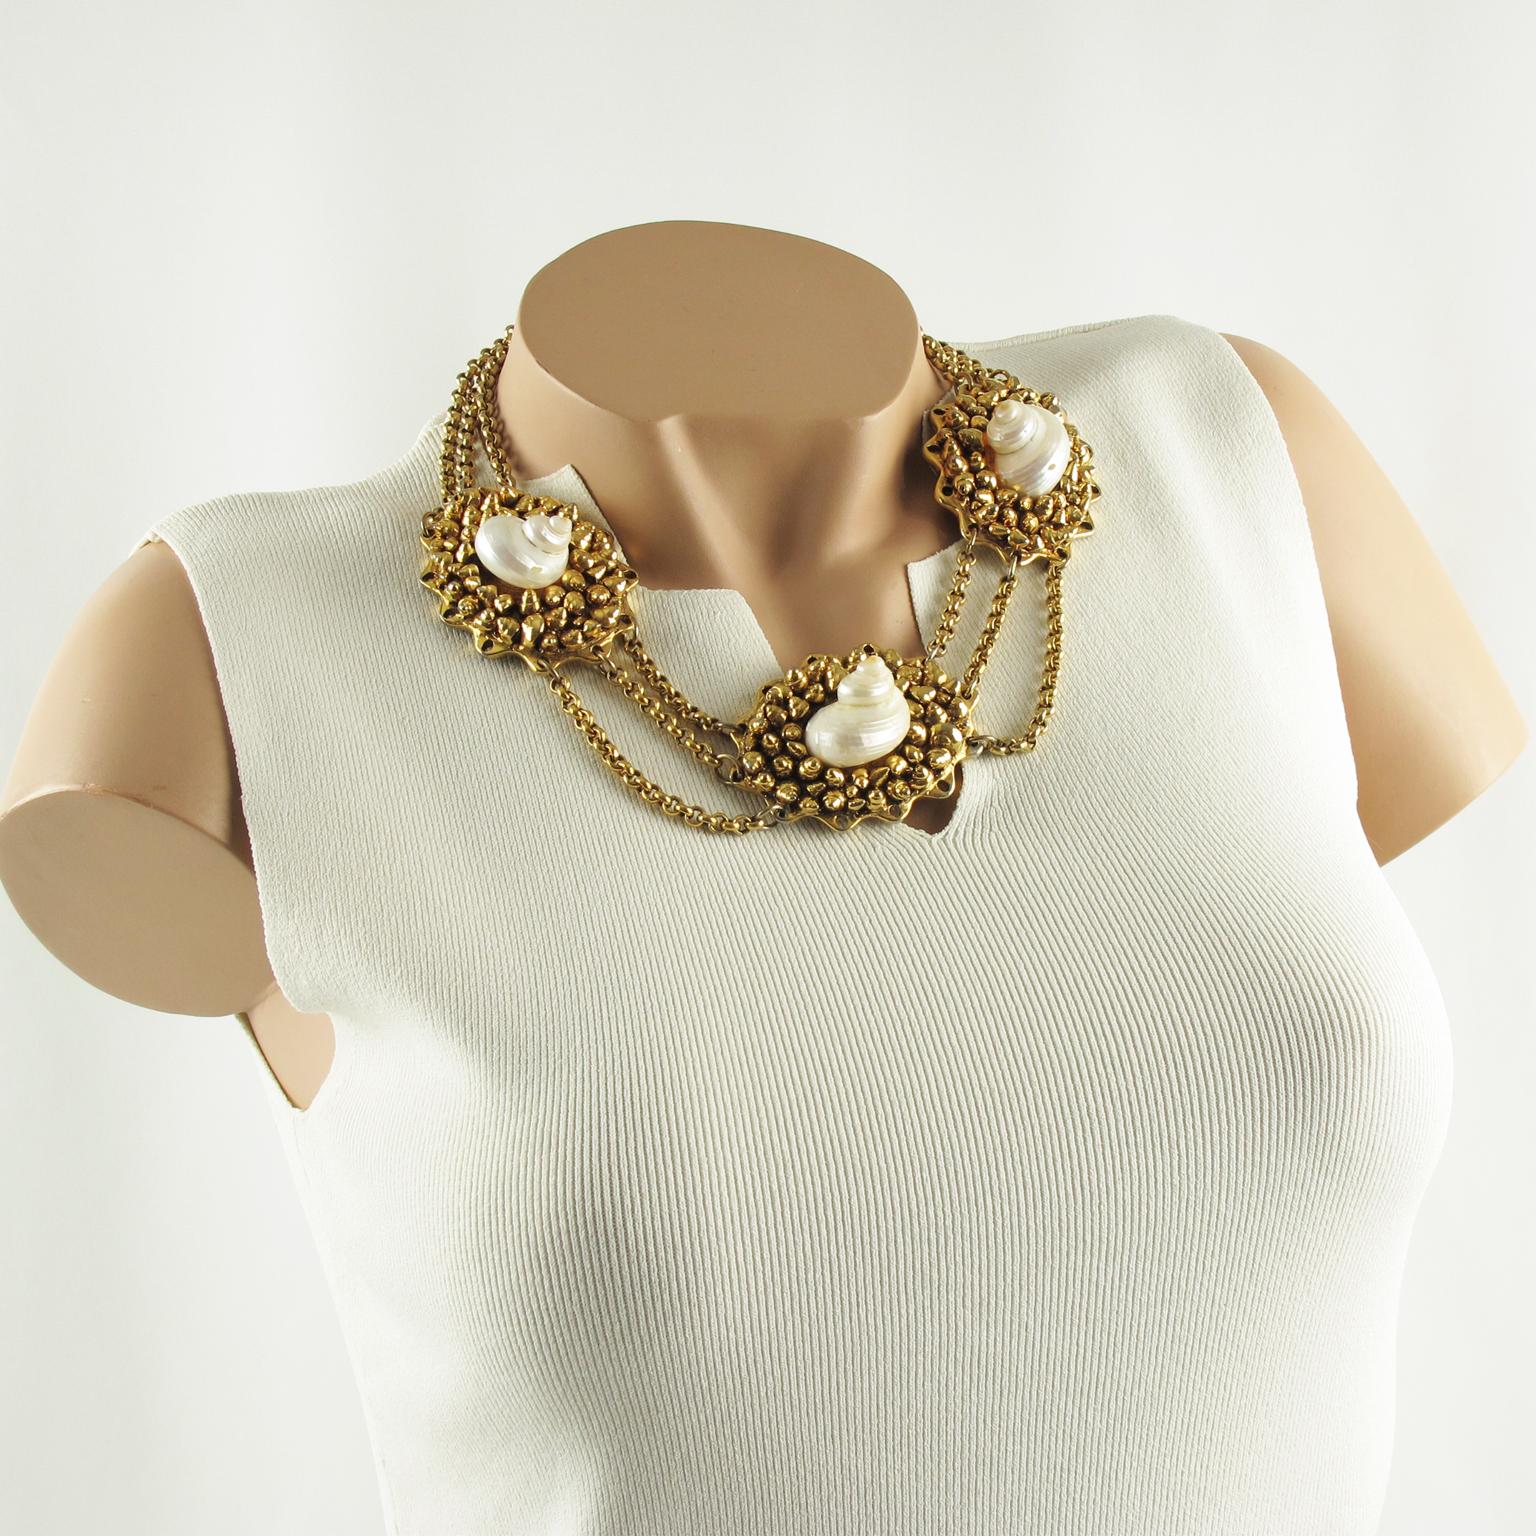 Stunning French fashion designer Chantal Thomass Paris signed choker necklace. Multi-strand gilt metal chain ornate with three huge medallions. Each medallion consists of gilt metal coated resin with tiny seashells carved and textured topped with